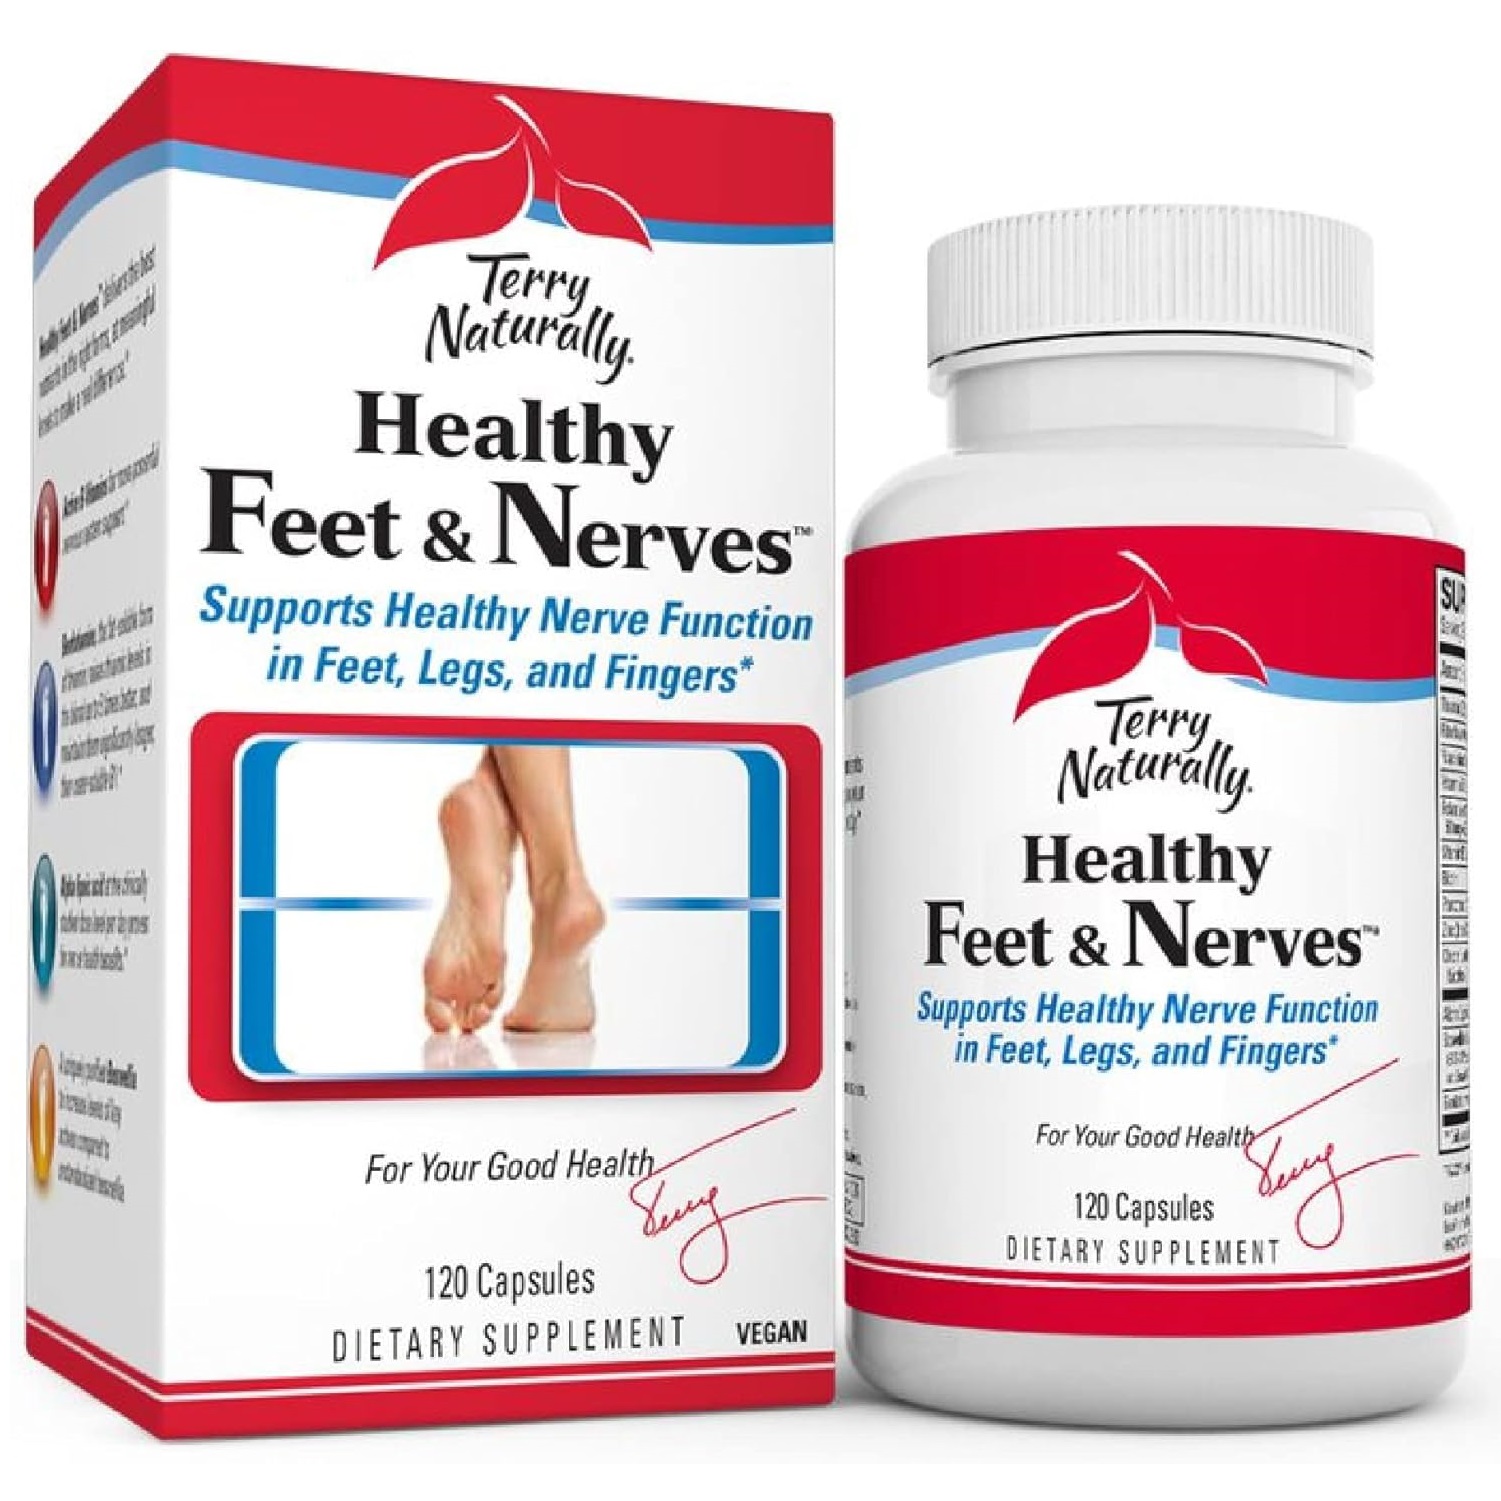 Terry-Naturally-Healthy-Feet-Nerves